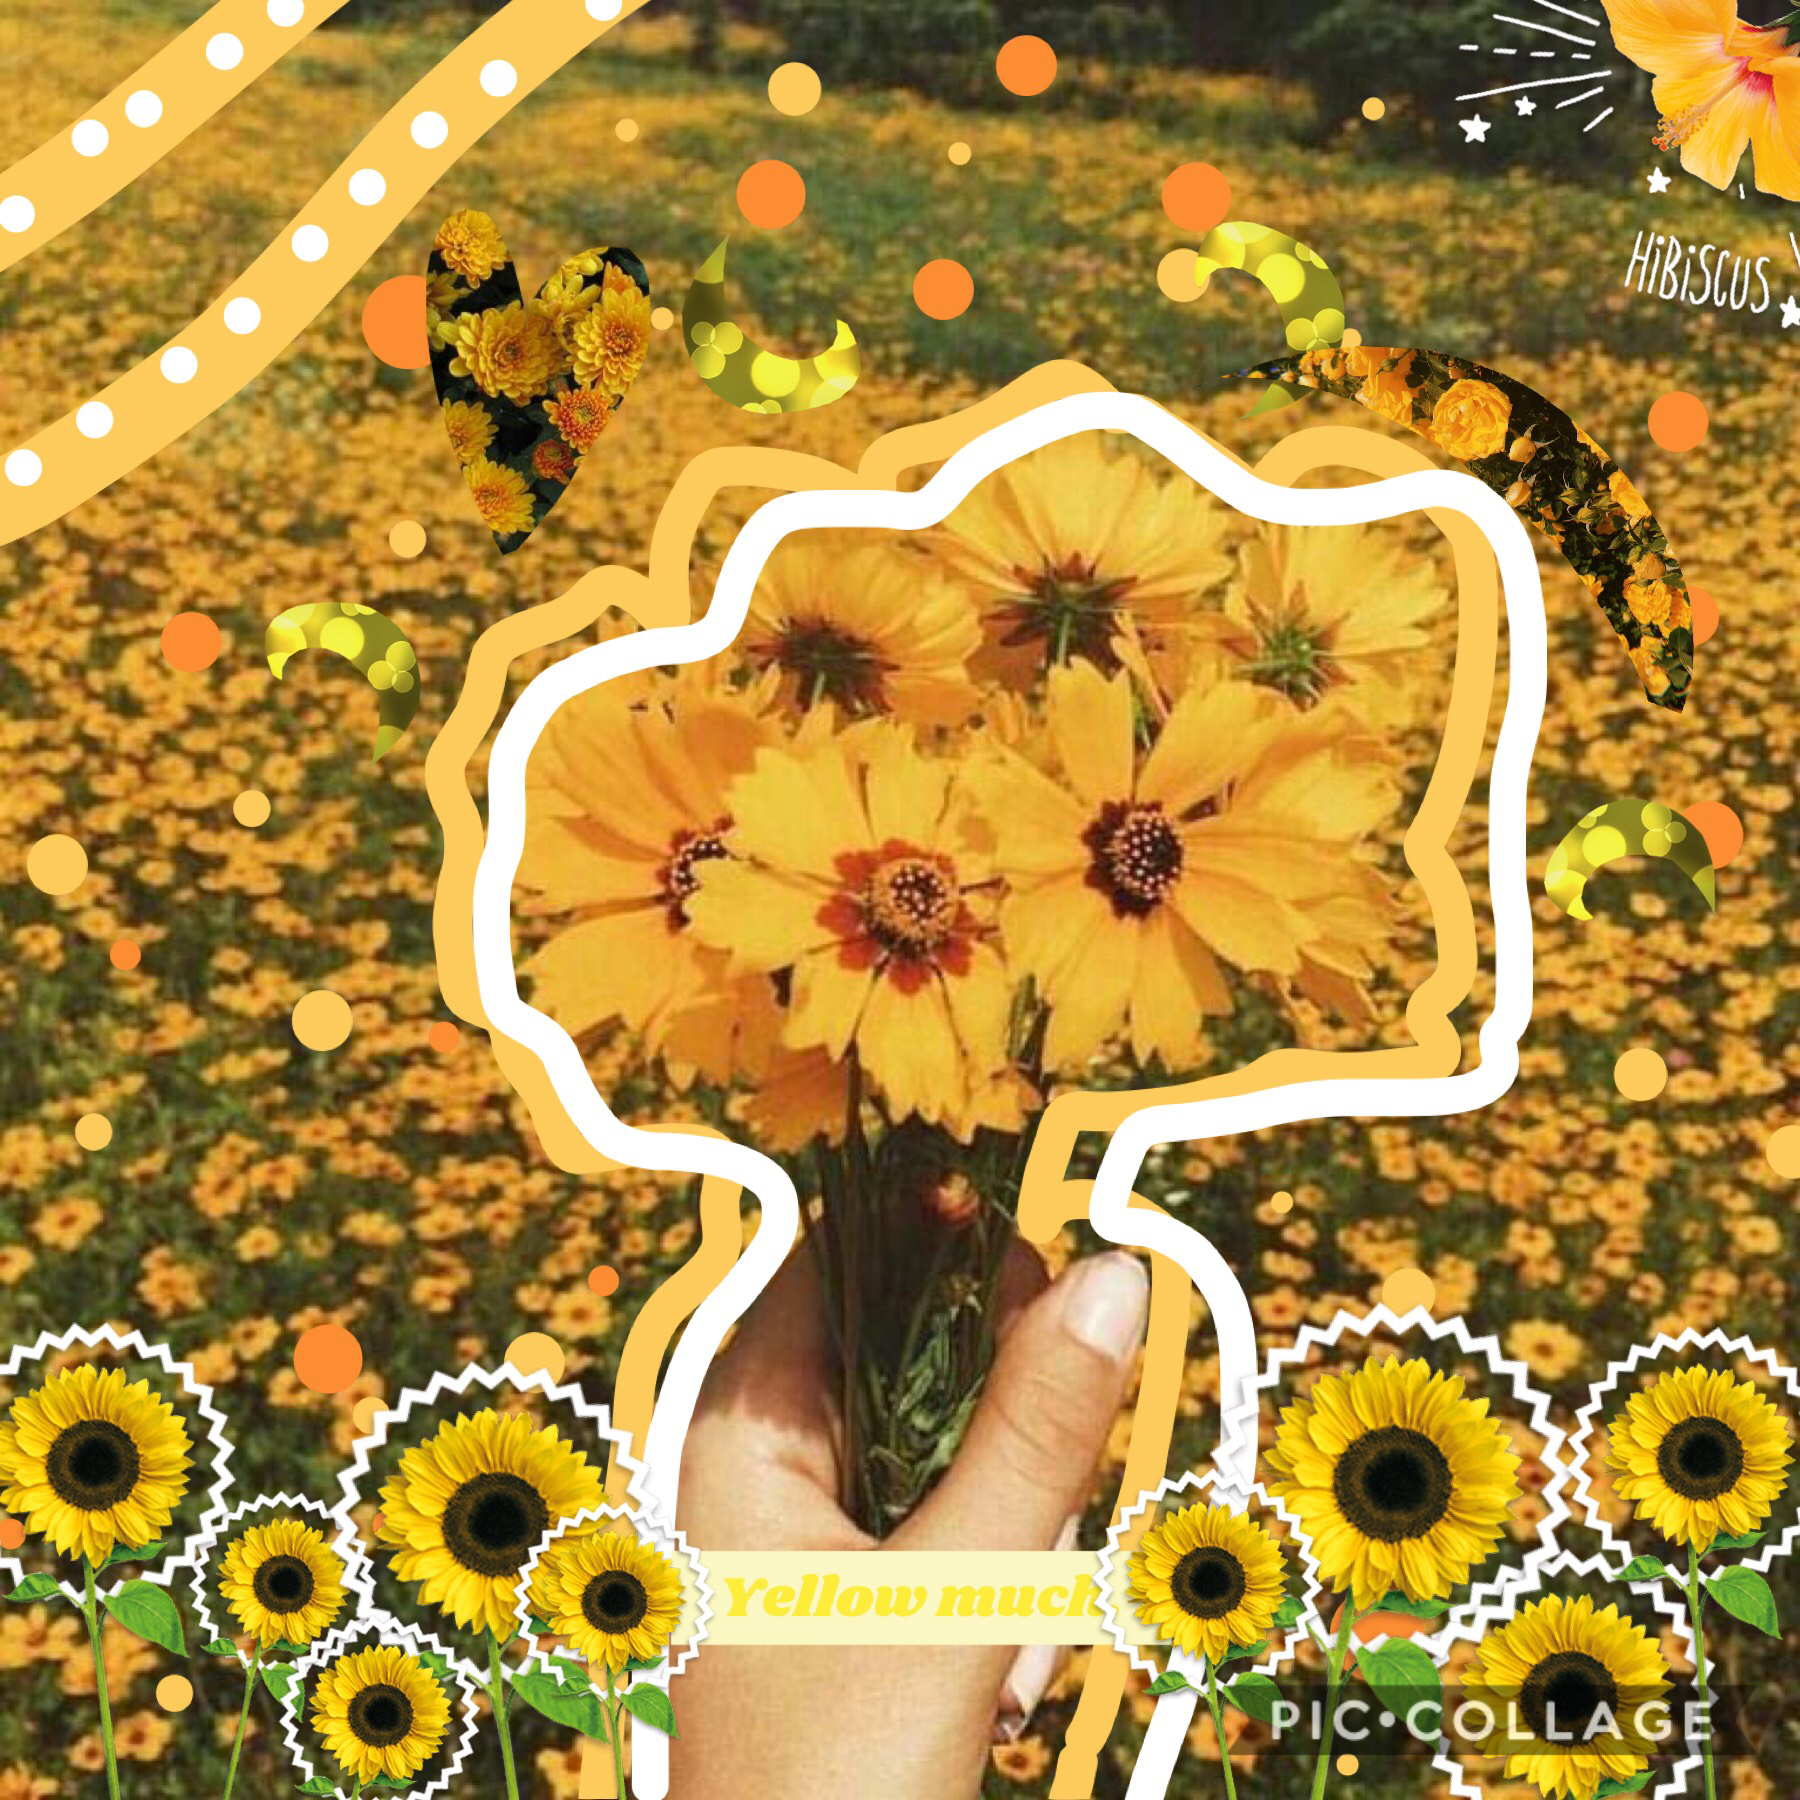 Yellow much💛


🌻If you found this type “Sunflowers support Sunflowers”🌻